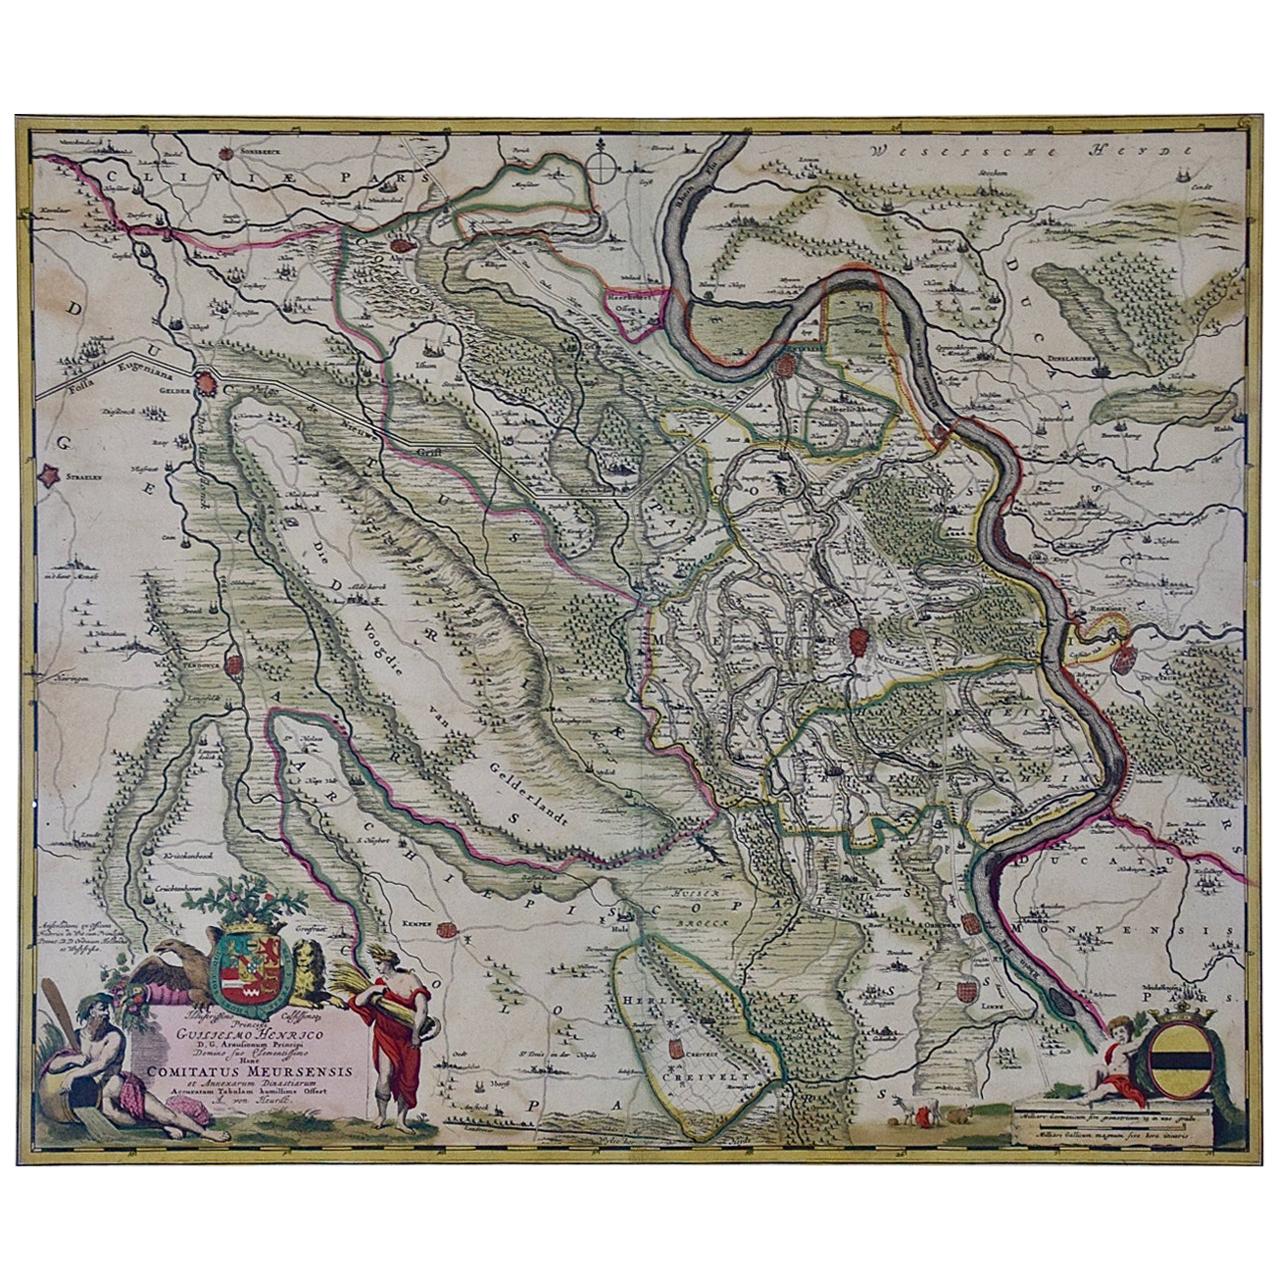 Germany West of the Rhine: A Hand-colored 18th Century Map by de Wit